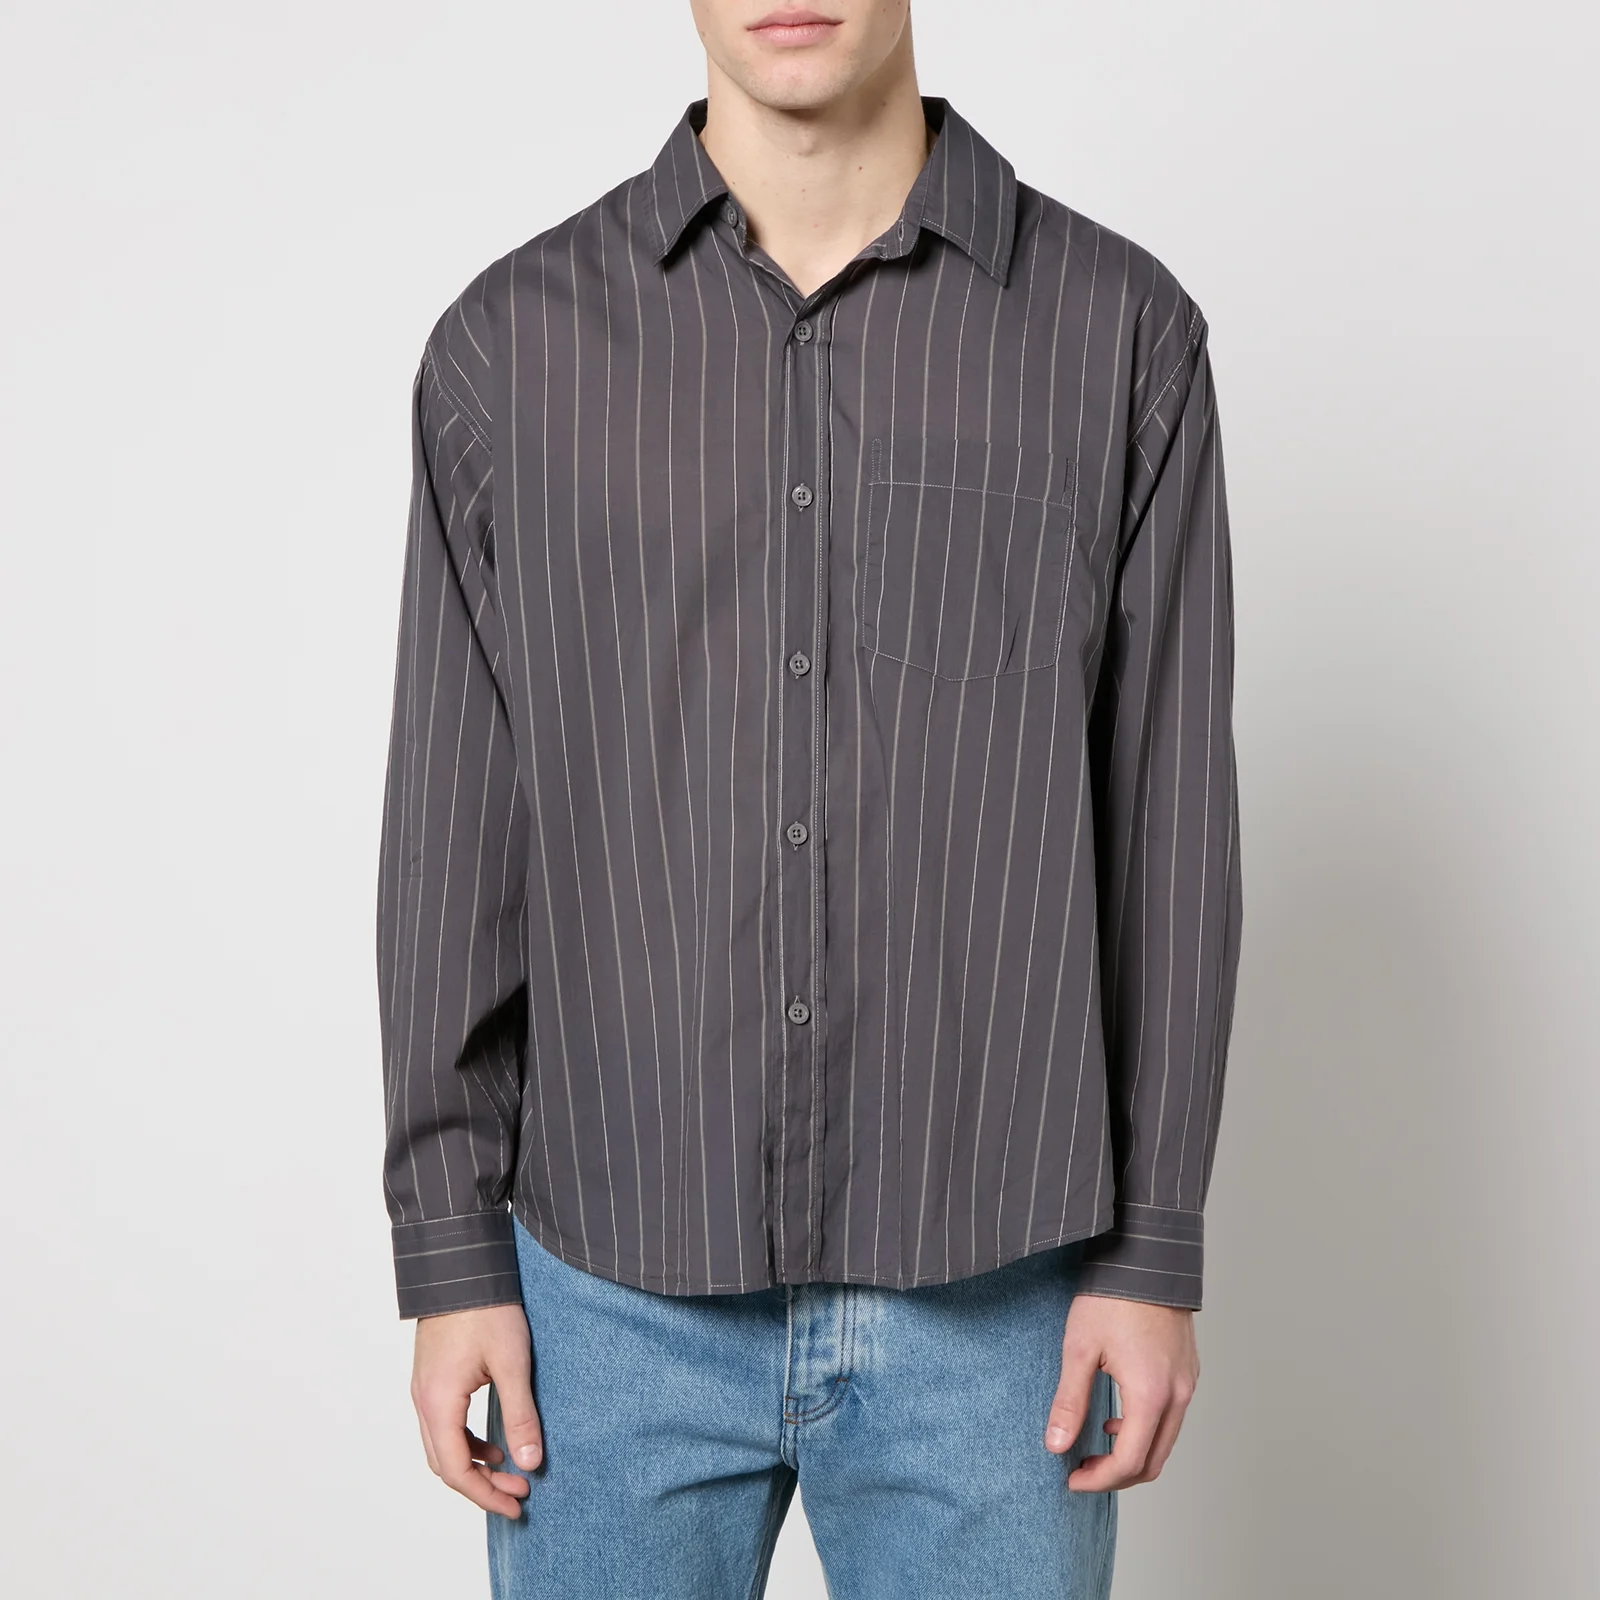 mfpen Executive Pinstriped Recycled Cotton Shirt - S Image 1